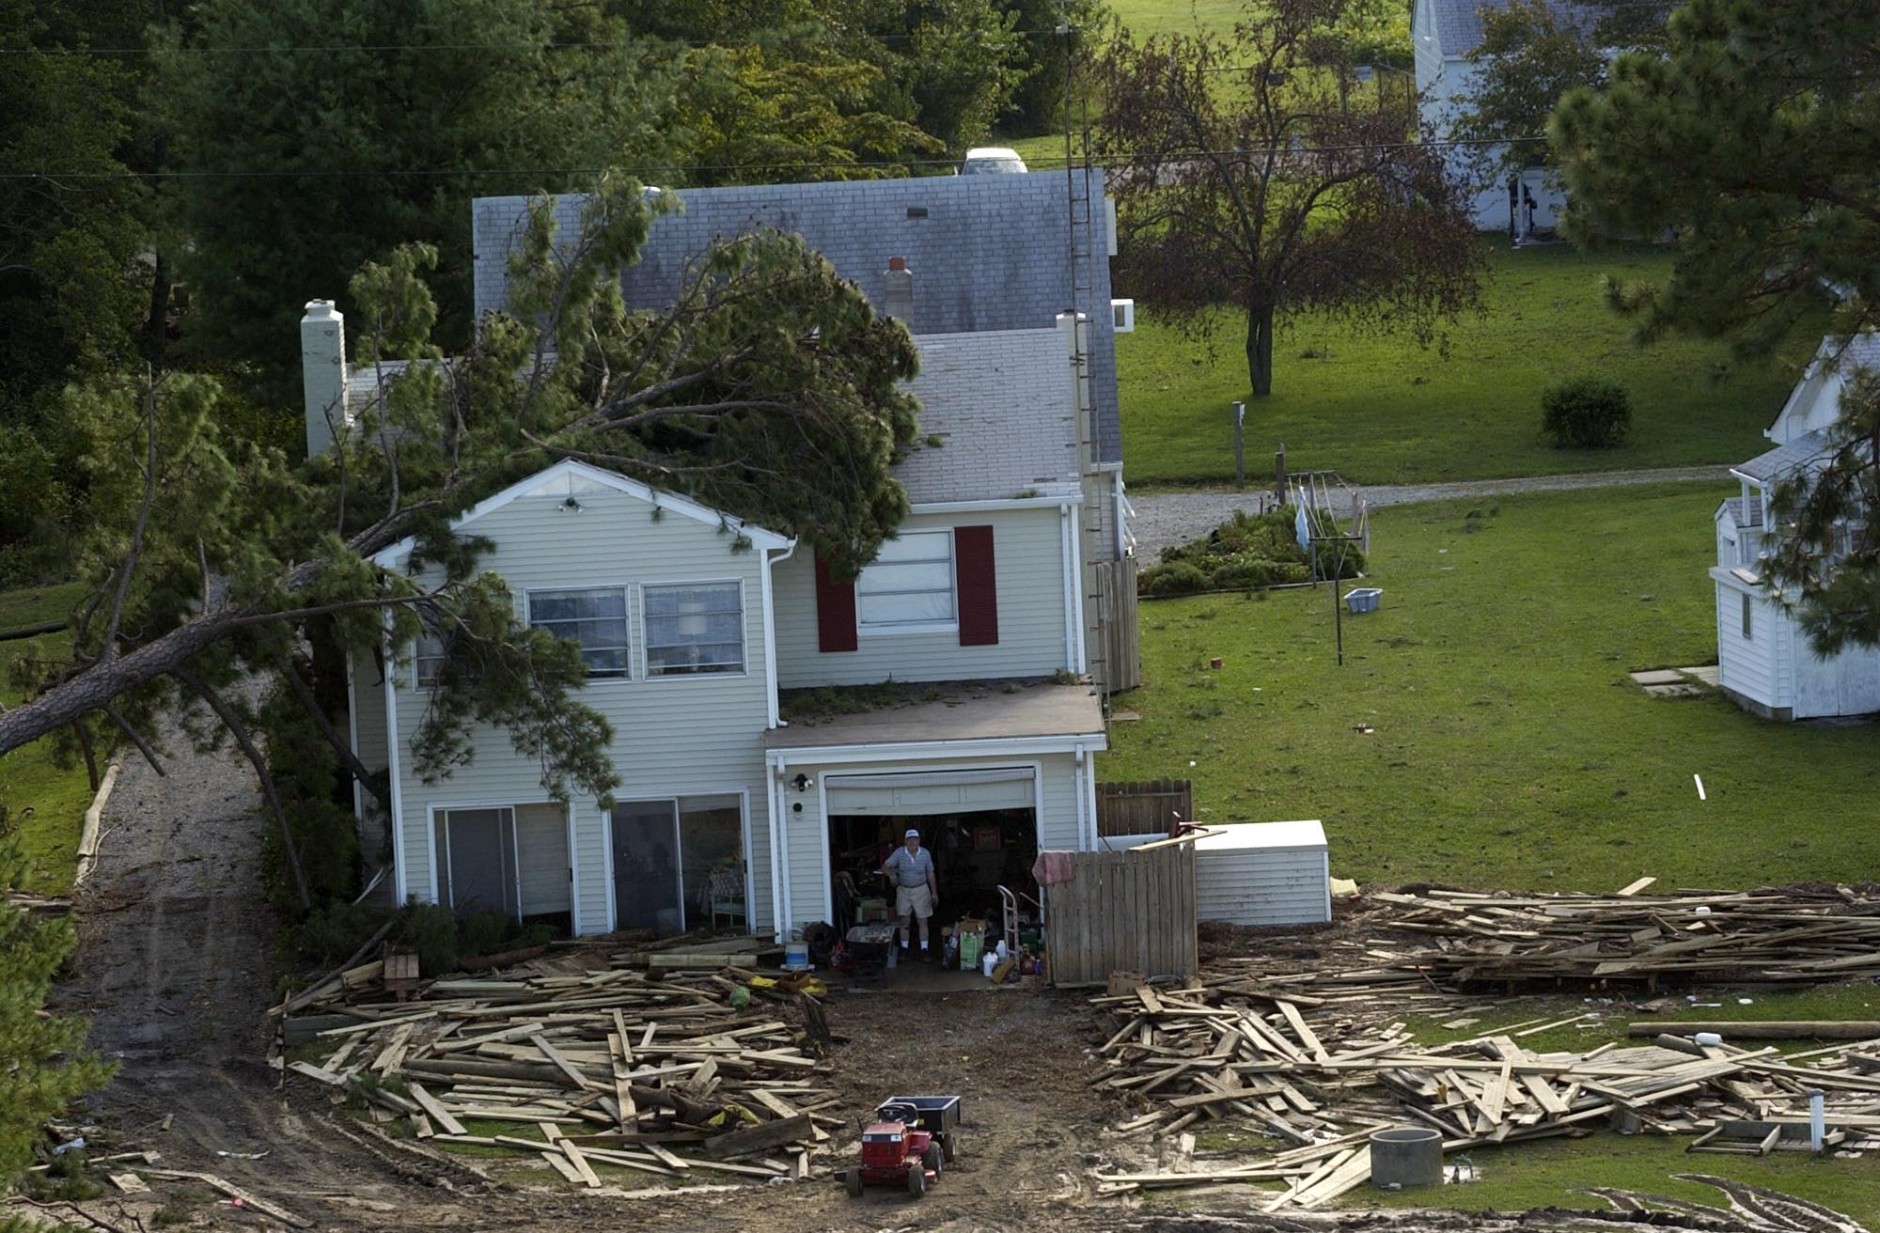 A man stands amidst damage to a home from Hurricane Isabel, which passed through the Church View, Va. area yesterday, on the banks of the Rappahannock River, Friday, Sept. 19, 2003. (AP Photo/Gerald Herbert)